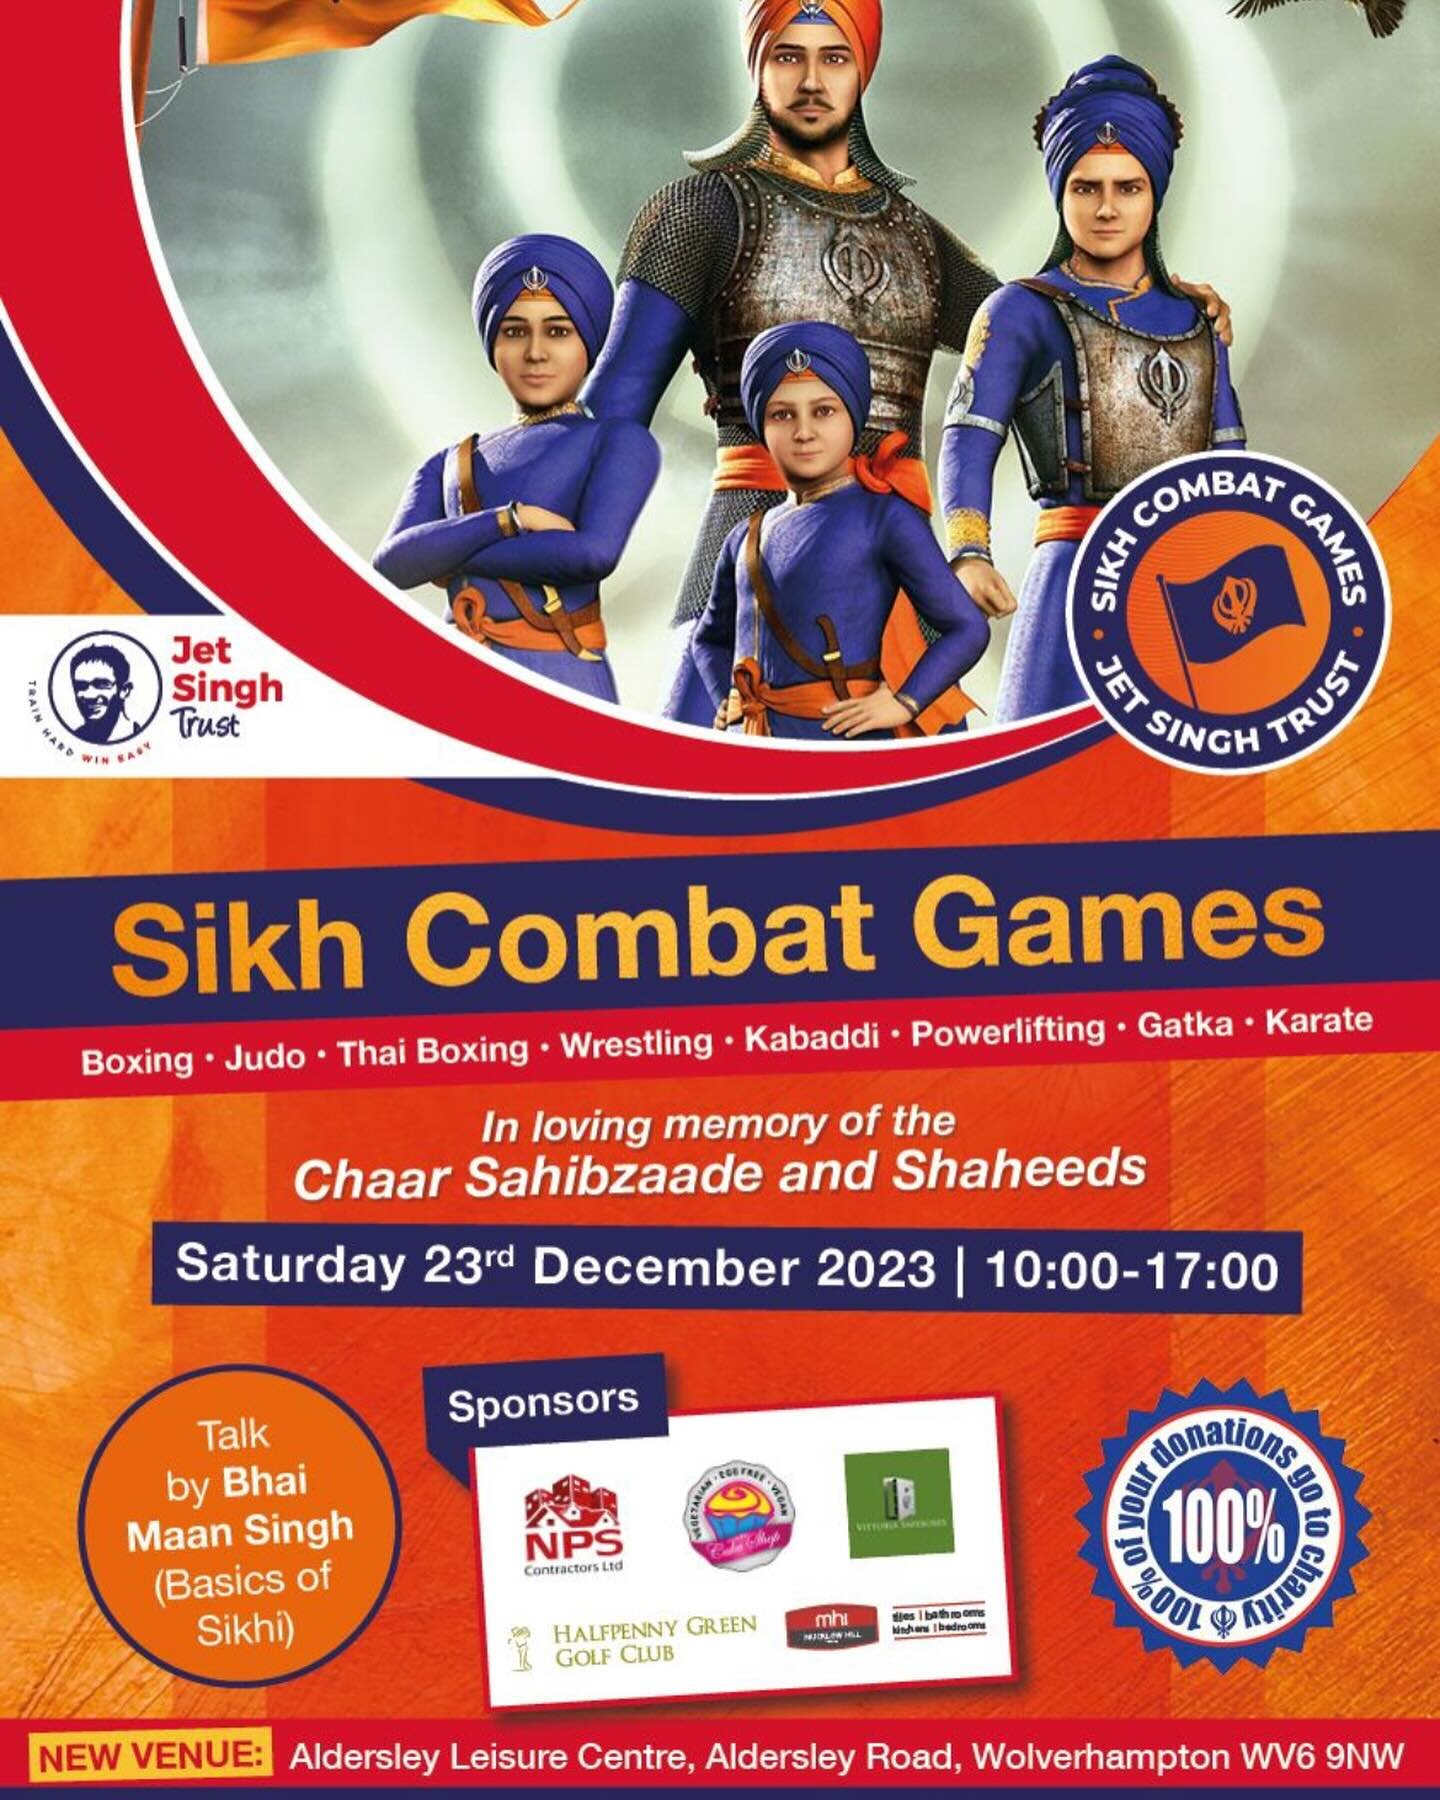 Count down has started, less than a week left. Please come along and support the day and remember the Four Sahibzade  and their sacrifices. The main aim of the day is to promote our different types of  martial arts sports,  showcase them for our next